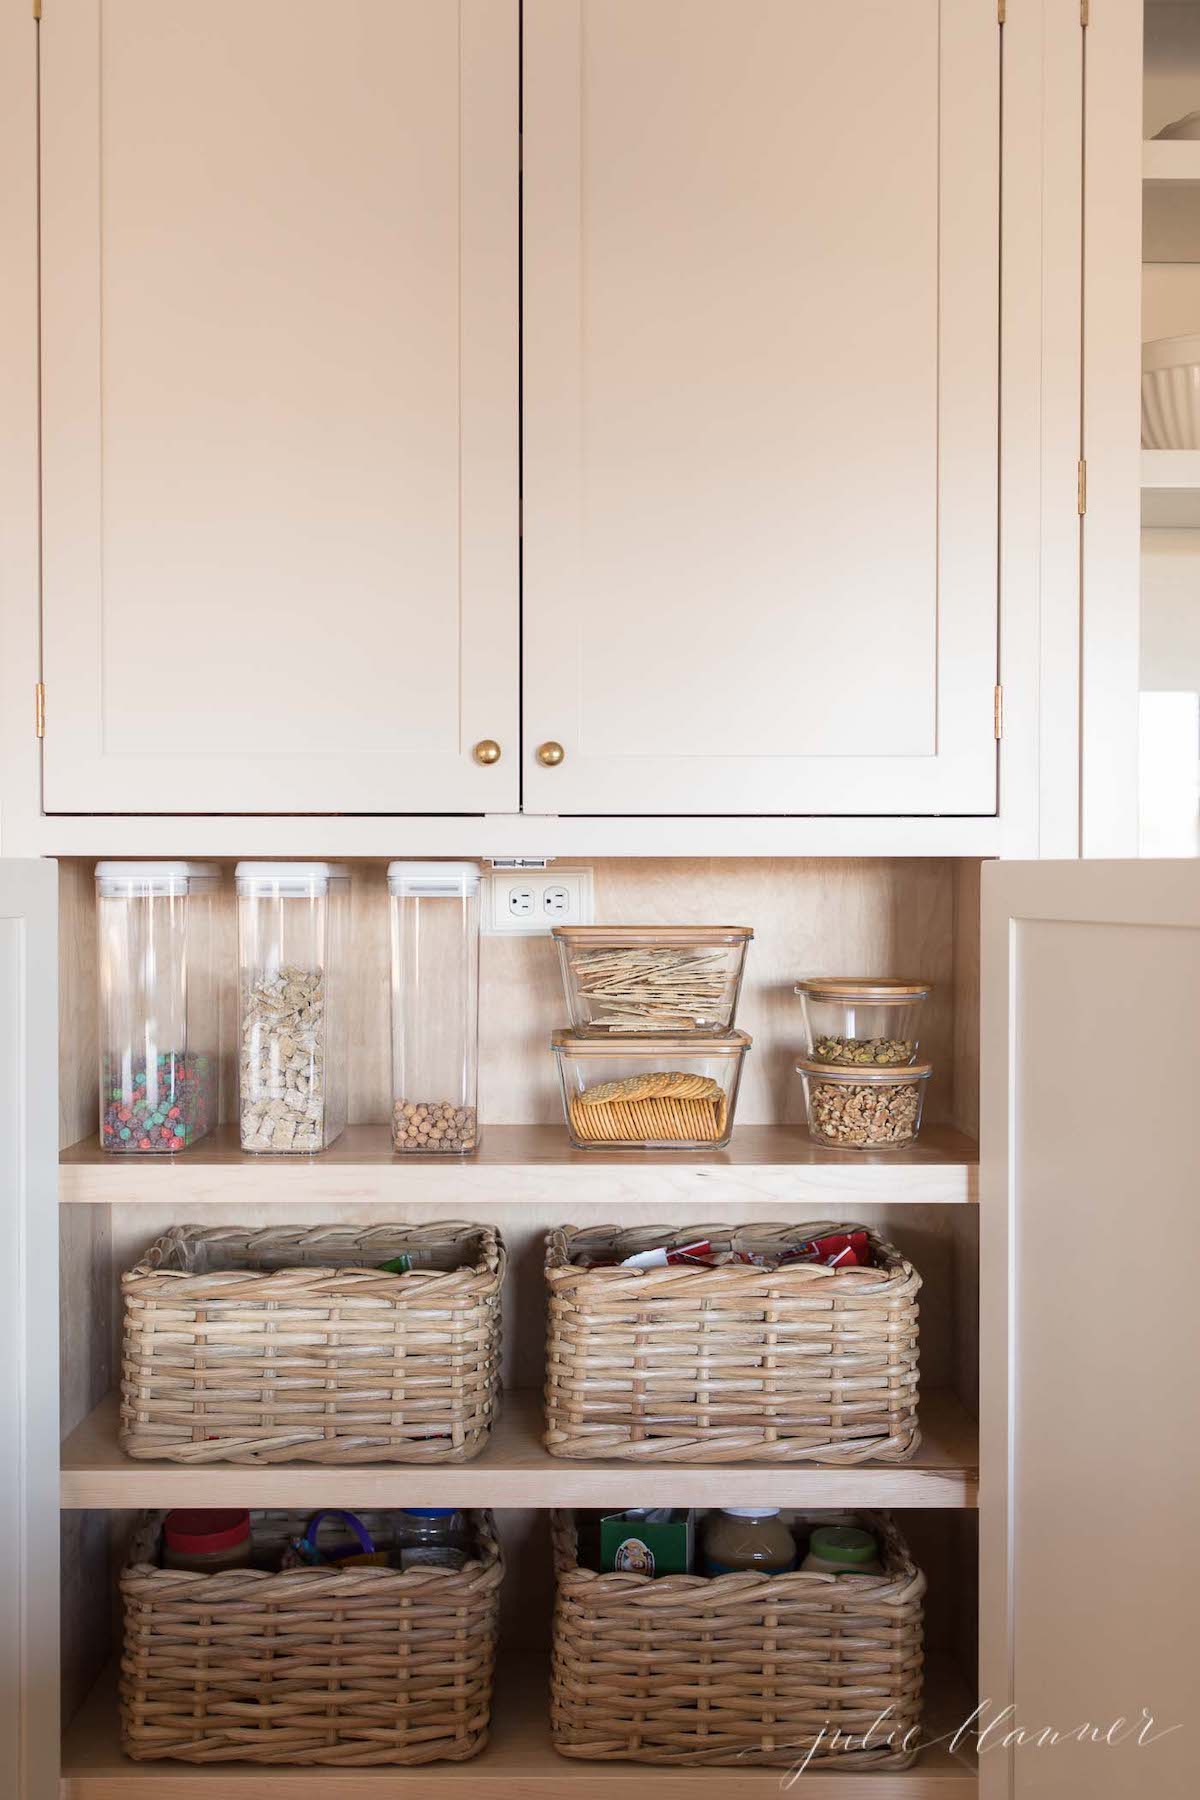 A white kitchen with wicker baskets for home organization in the cabinets.